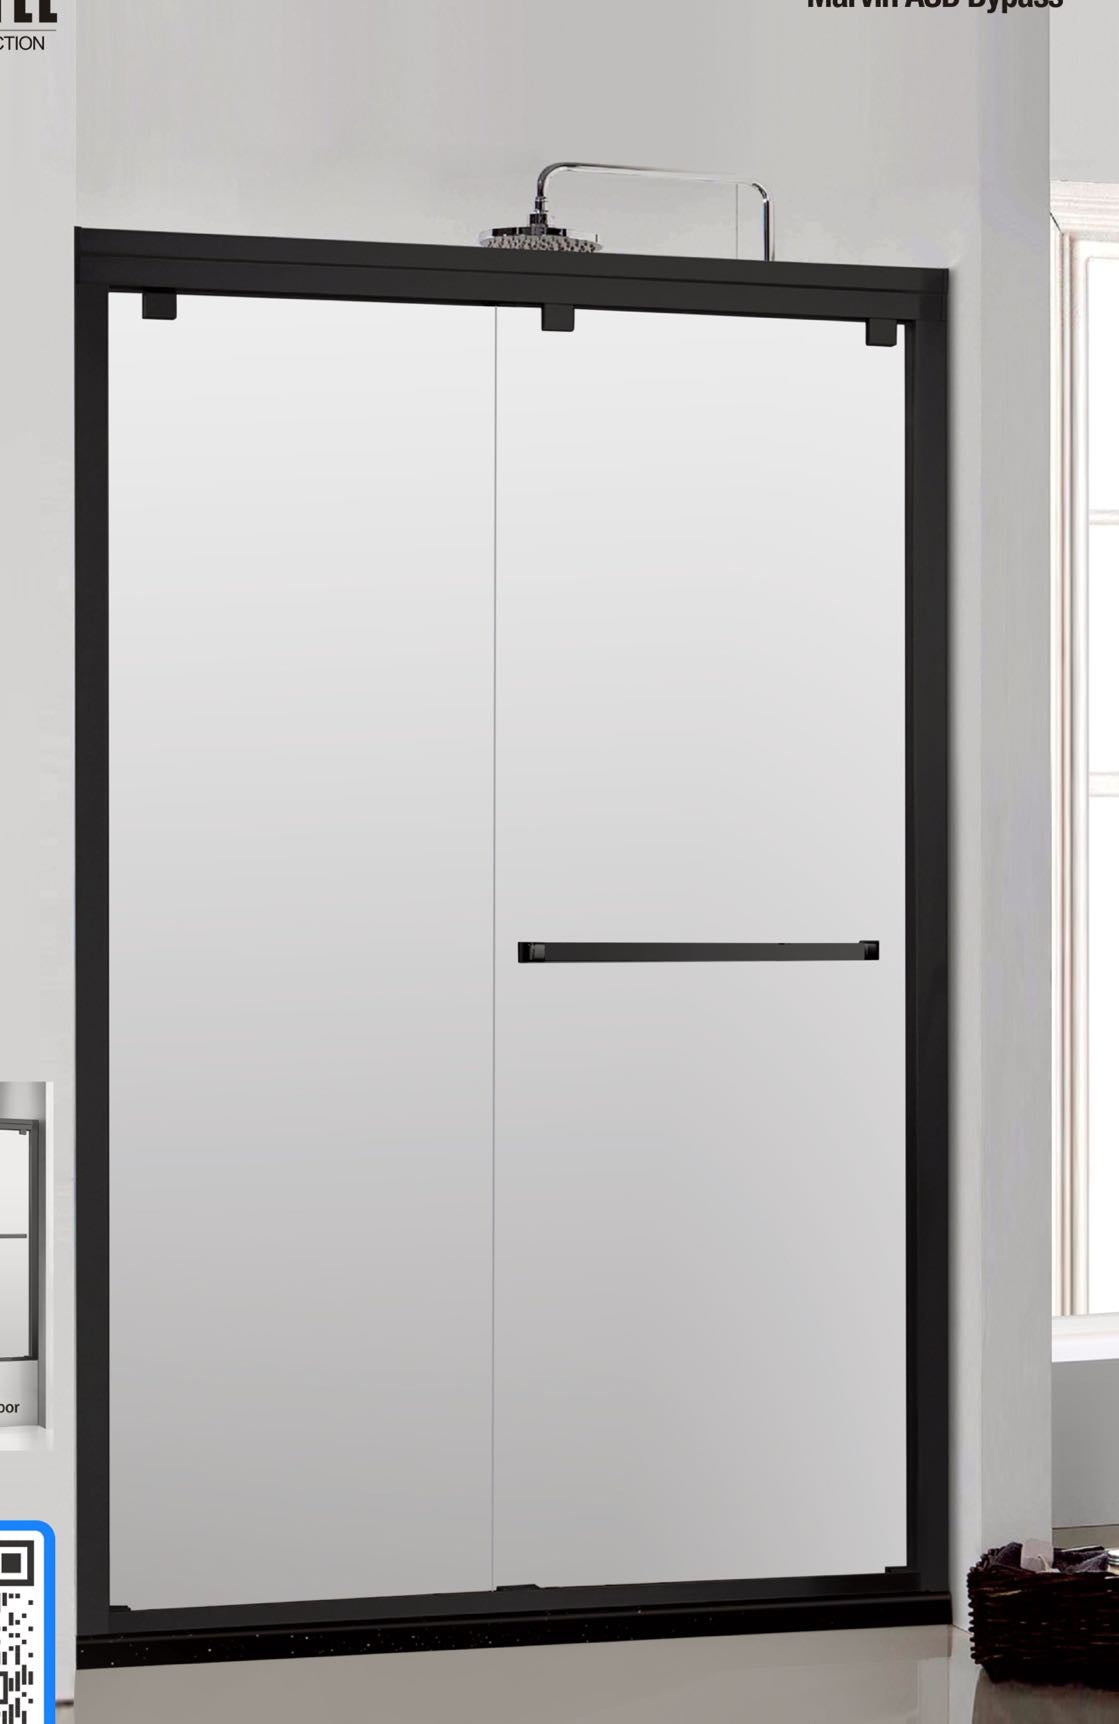 60" ASD Series Bypass Standing Shower Door (5/16" Thickness) (Matte Black) Low Ceiling Privacy Frosted